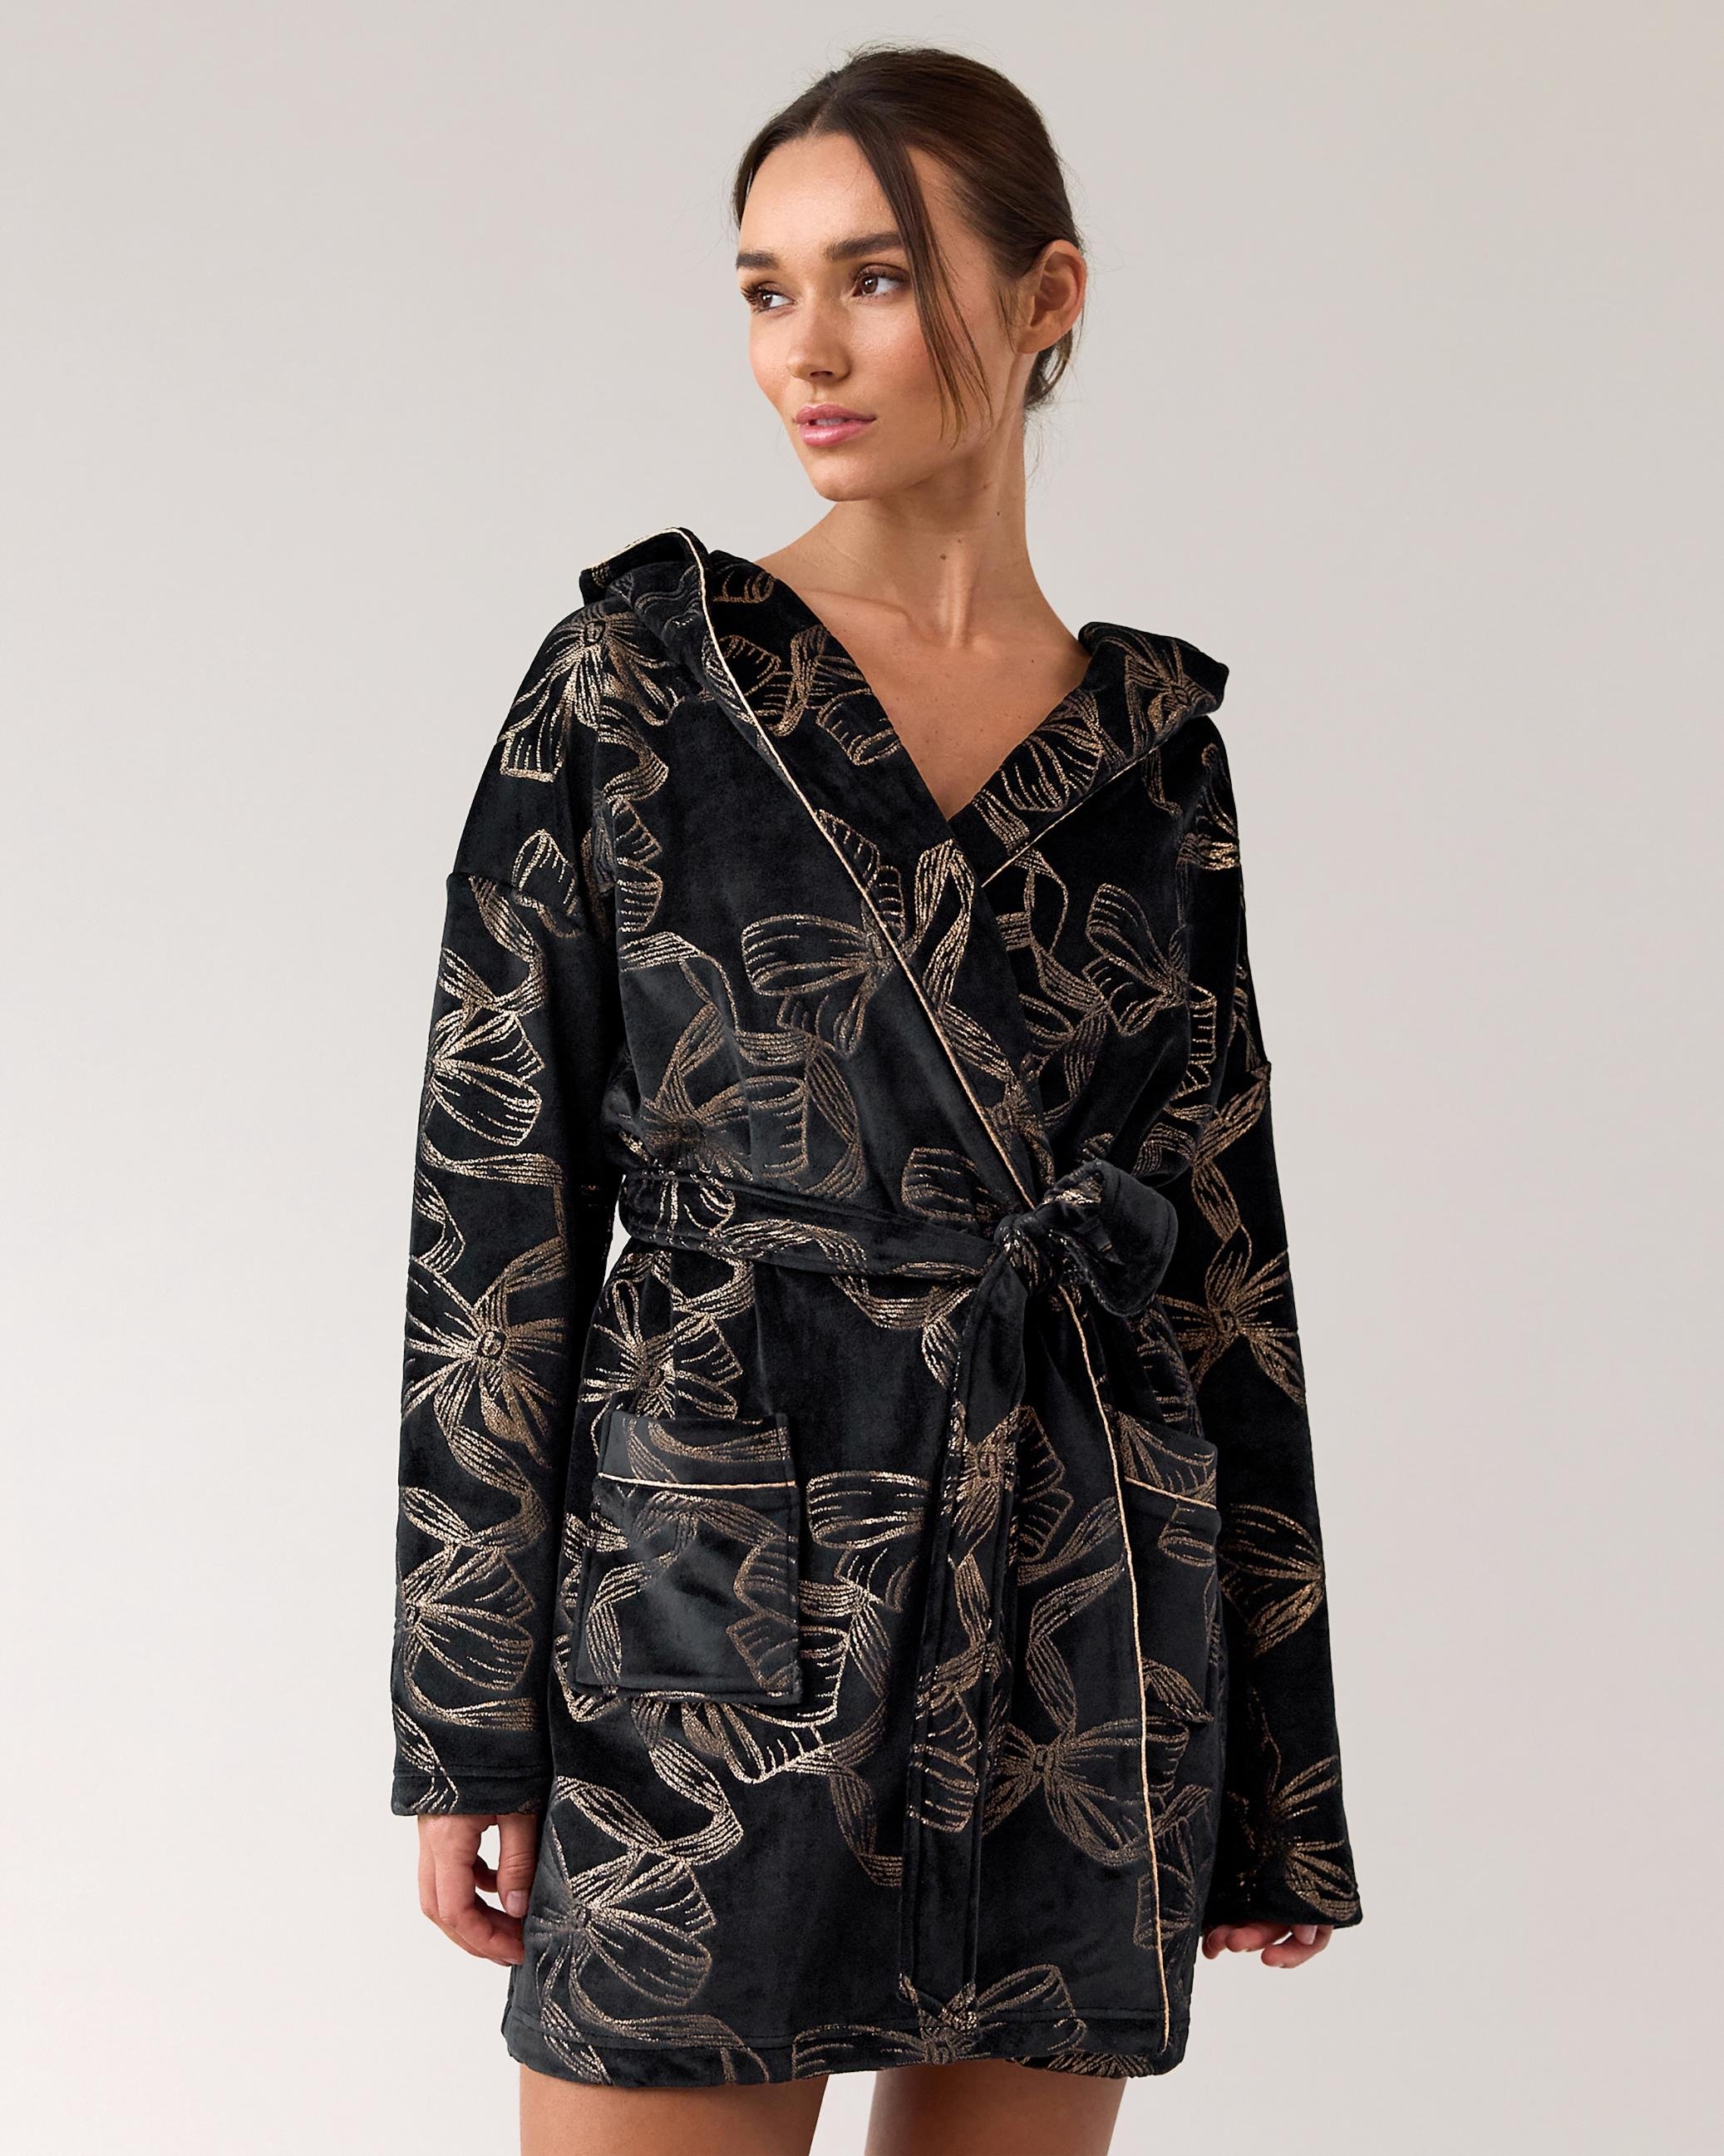 D82752 Bow Print Robe - BOWWEE - Black by TED BAKER